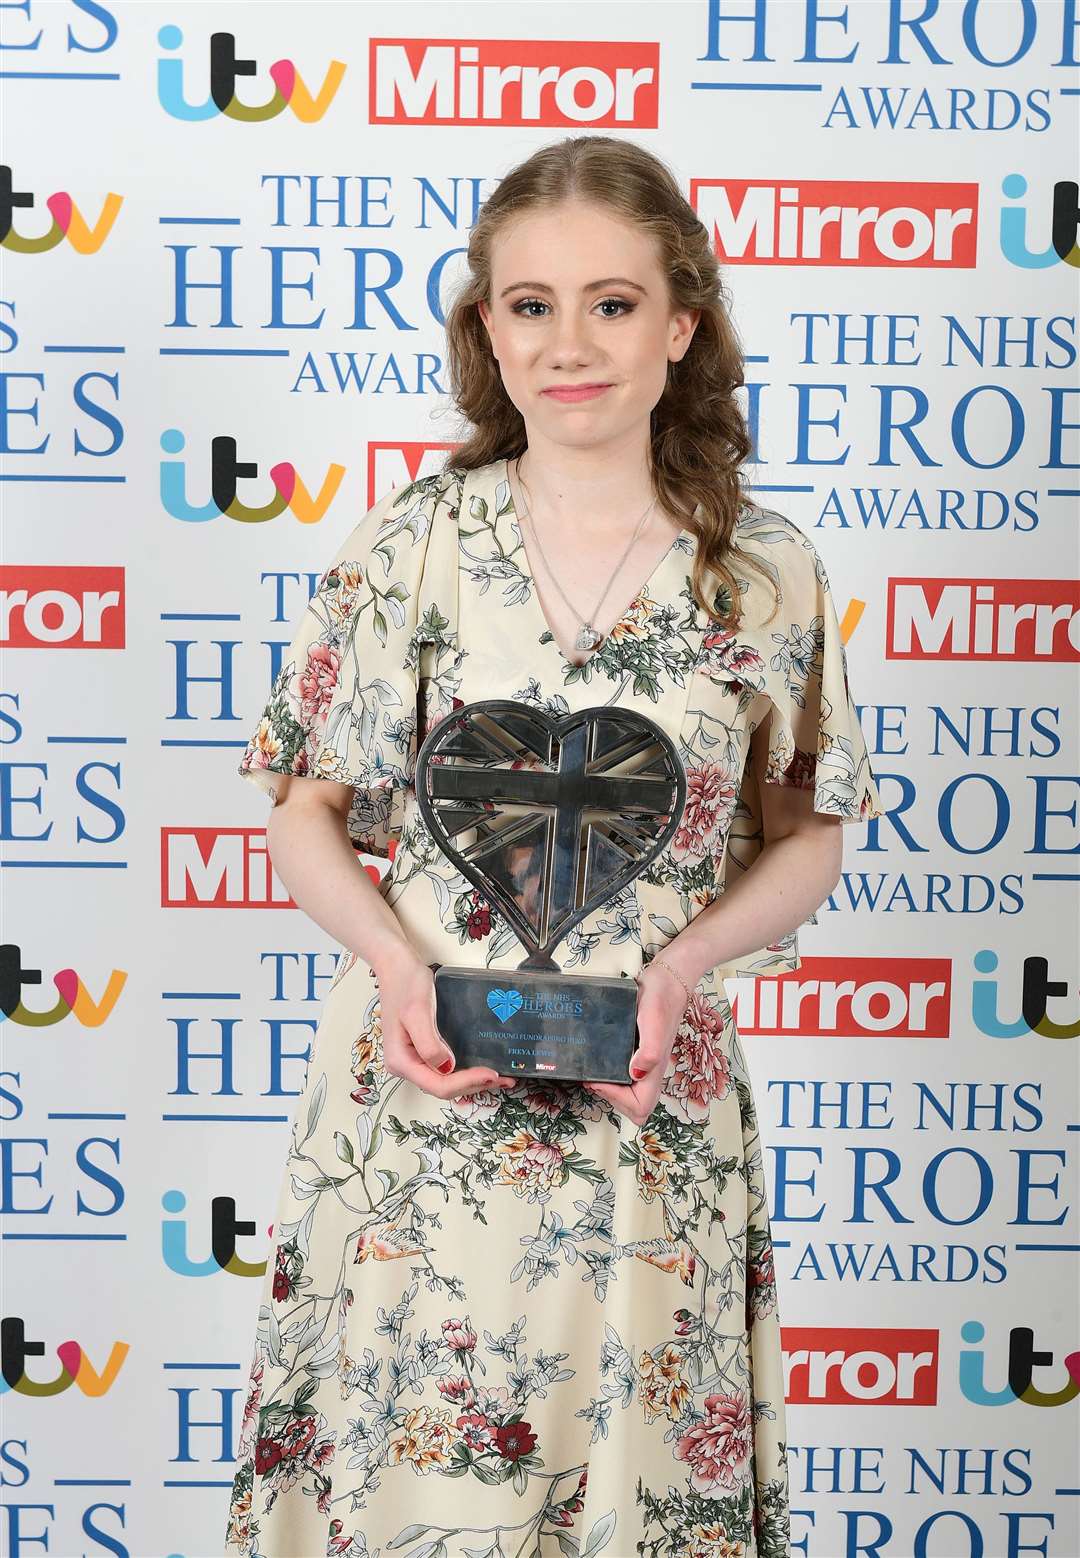 Freya Lewis was recognised with the 2018 Young Fundraiser Award at the NHS Heroes Awards at the Hilton Hotel in London (Ian West/PA)